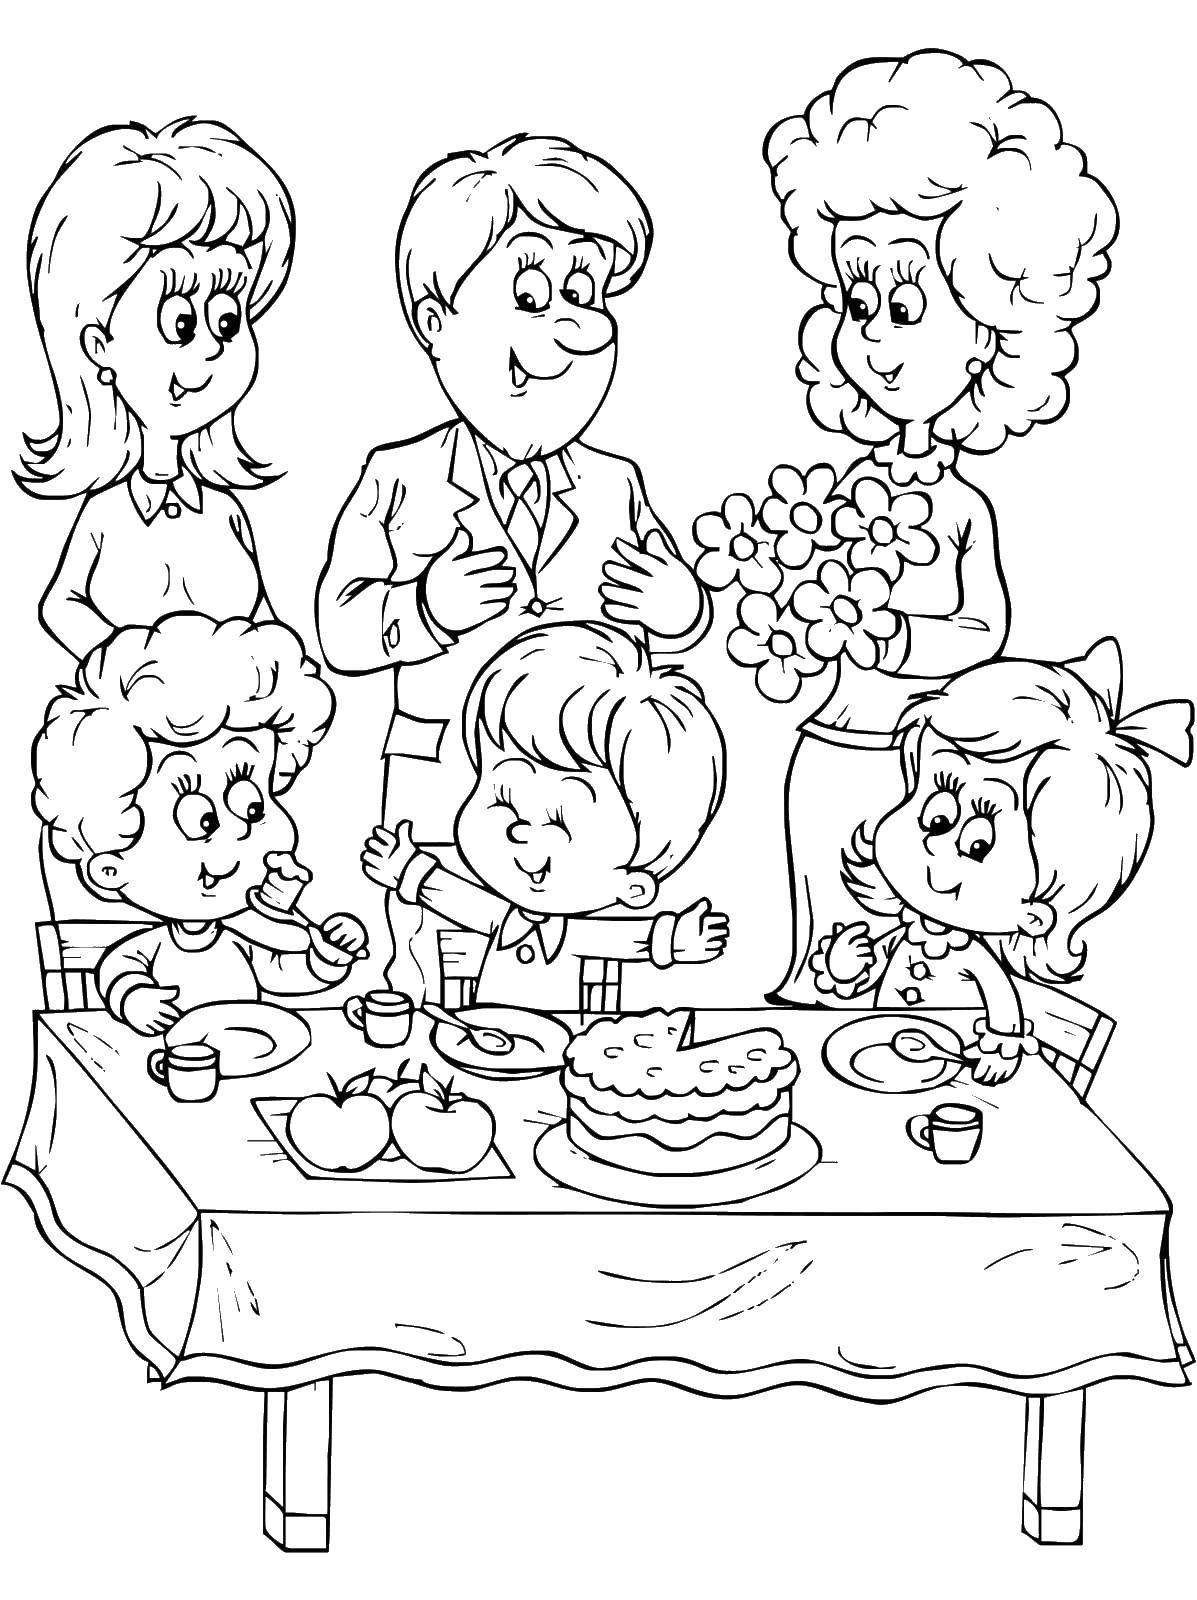 Coloring Festive table with guests. Category holiday. Tags:  cake, table, children.